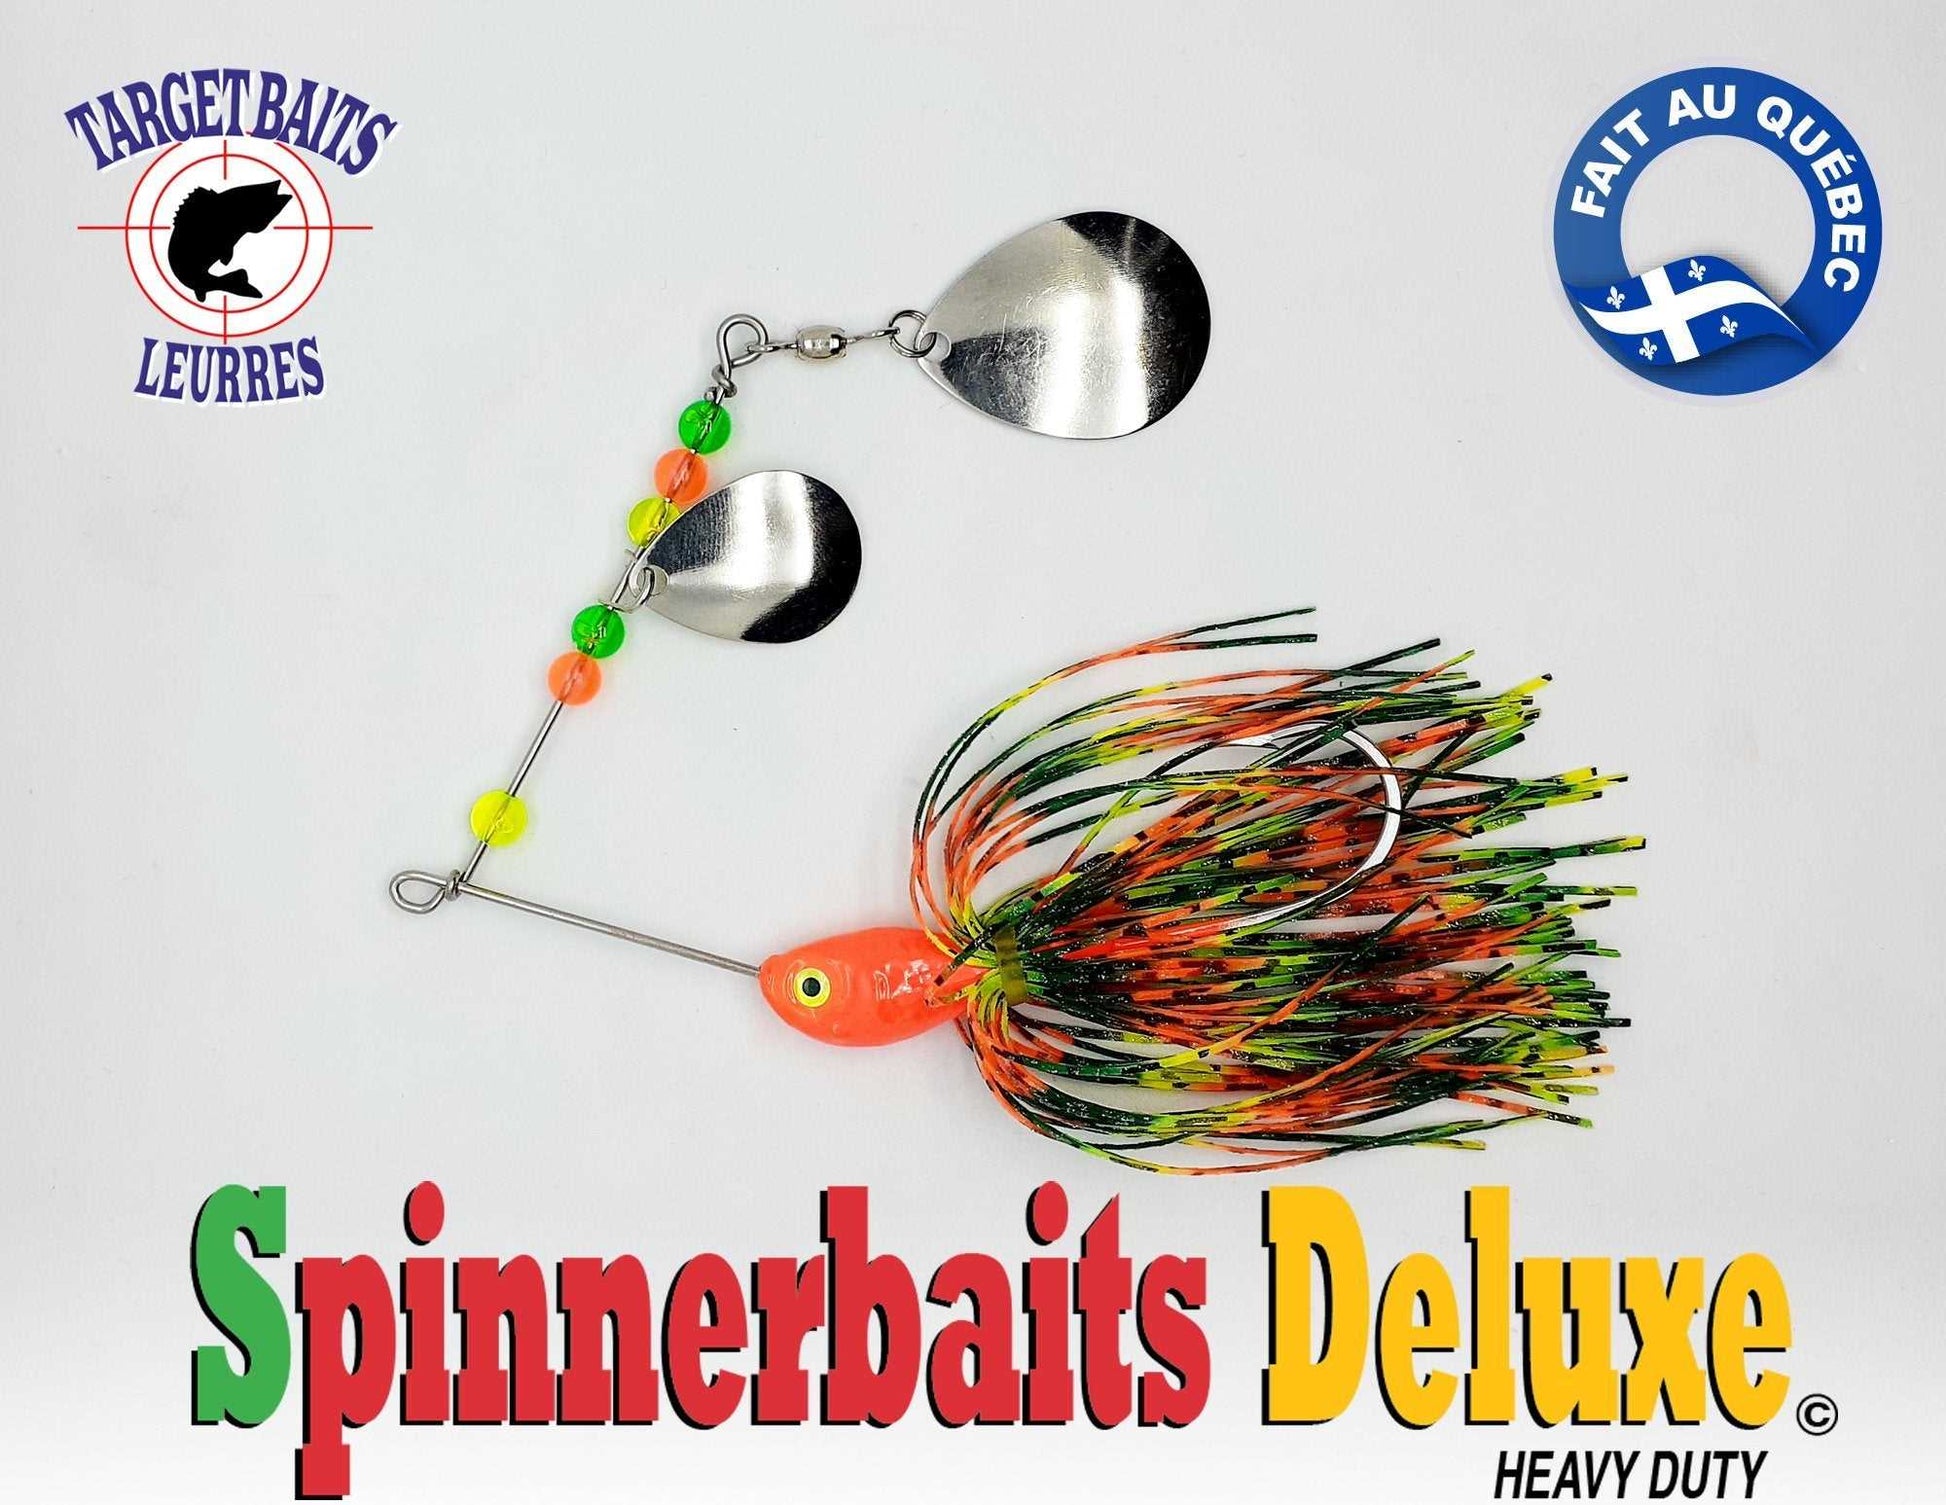 Spinnerbait options for NOW, Pork trailer replacement? Cold water